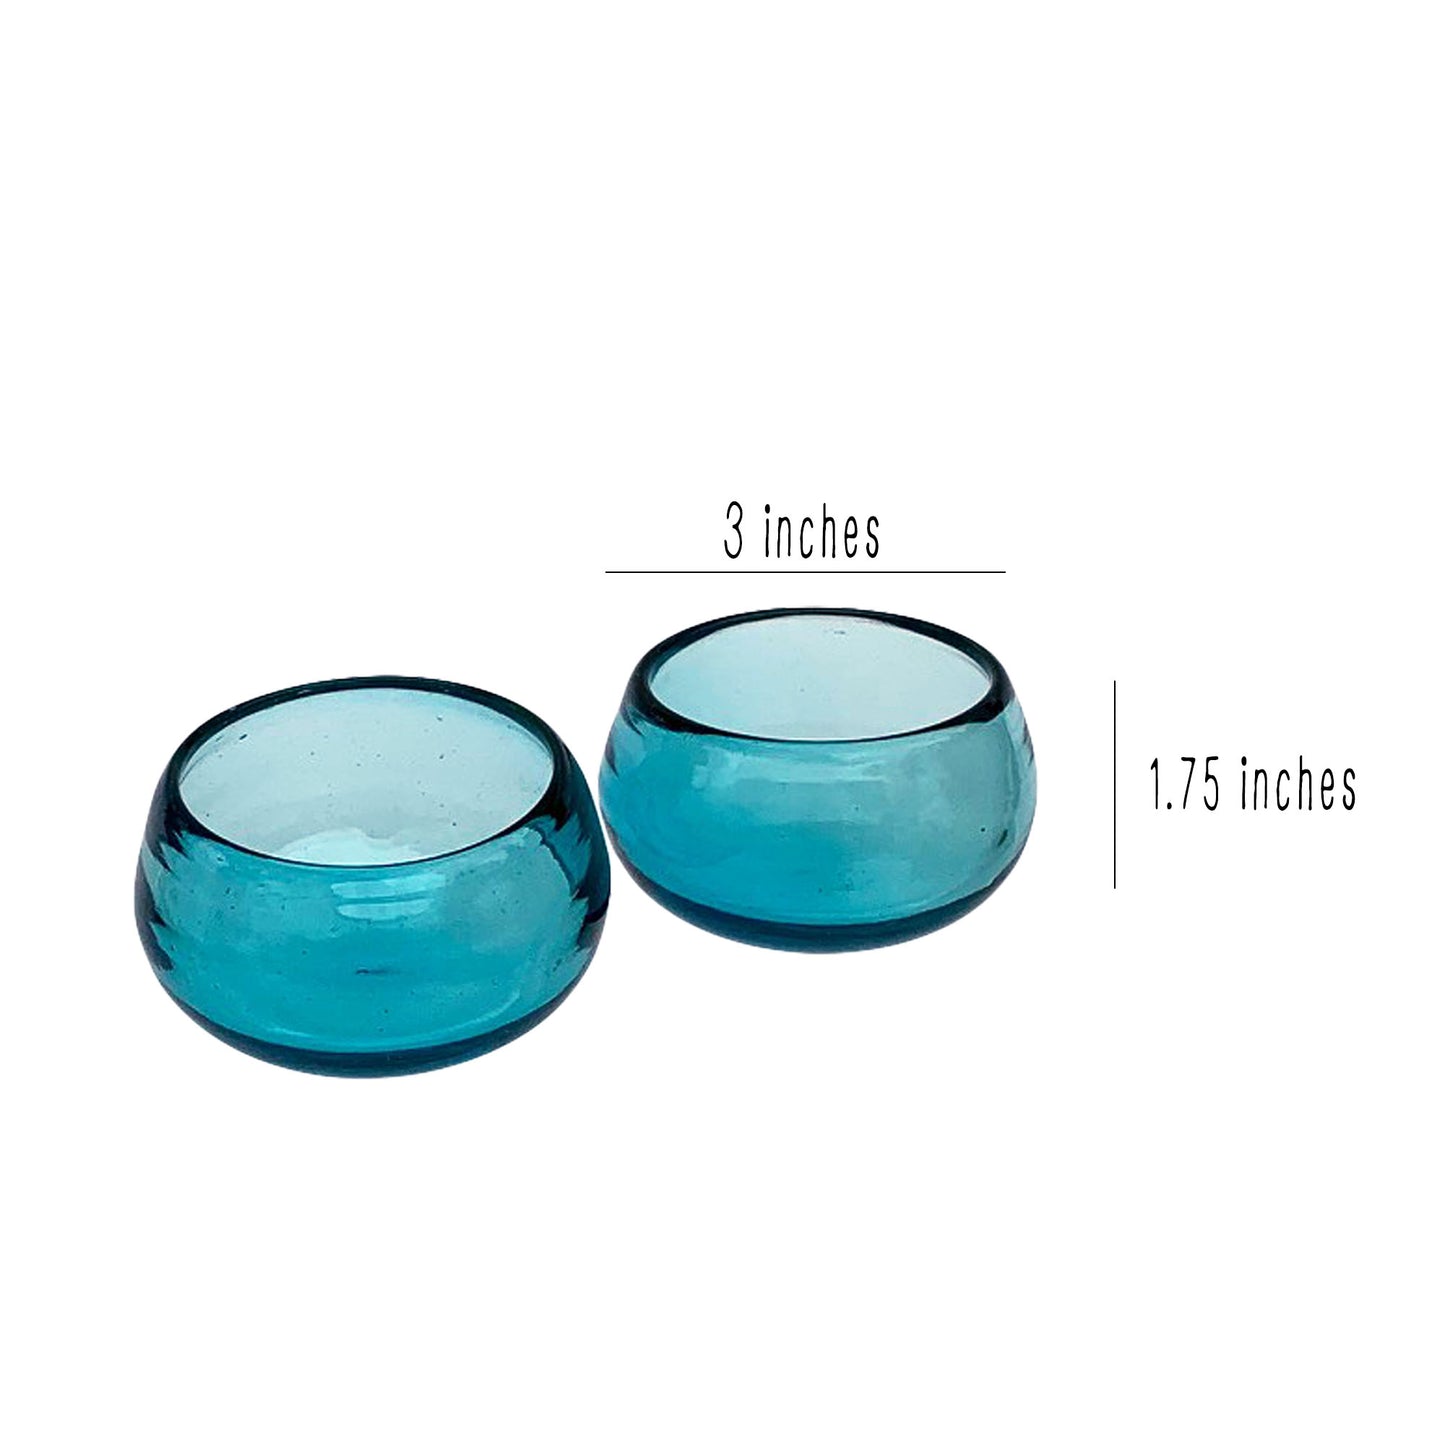 Mexican Hand Blown Recycled Glass Copitas for Mezcal or Tequila | Handmade Wide Mouth Shot Glasses in Turquoise Blue